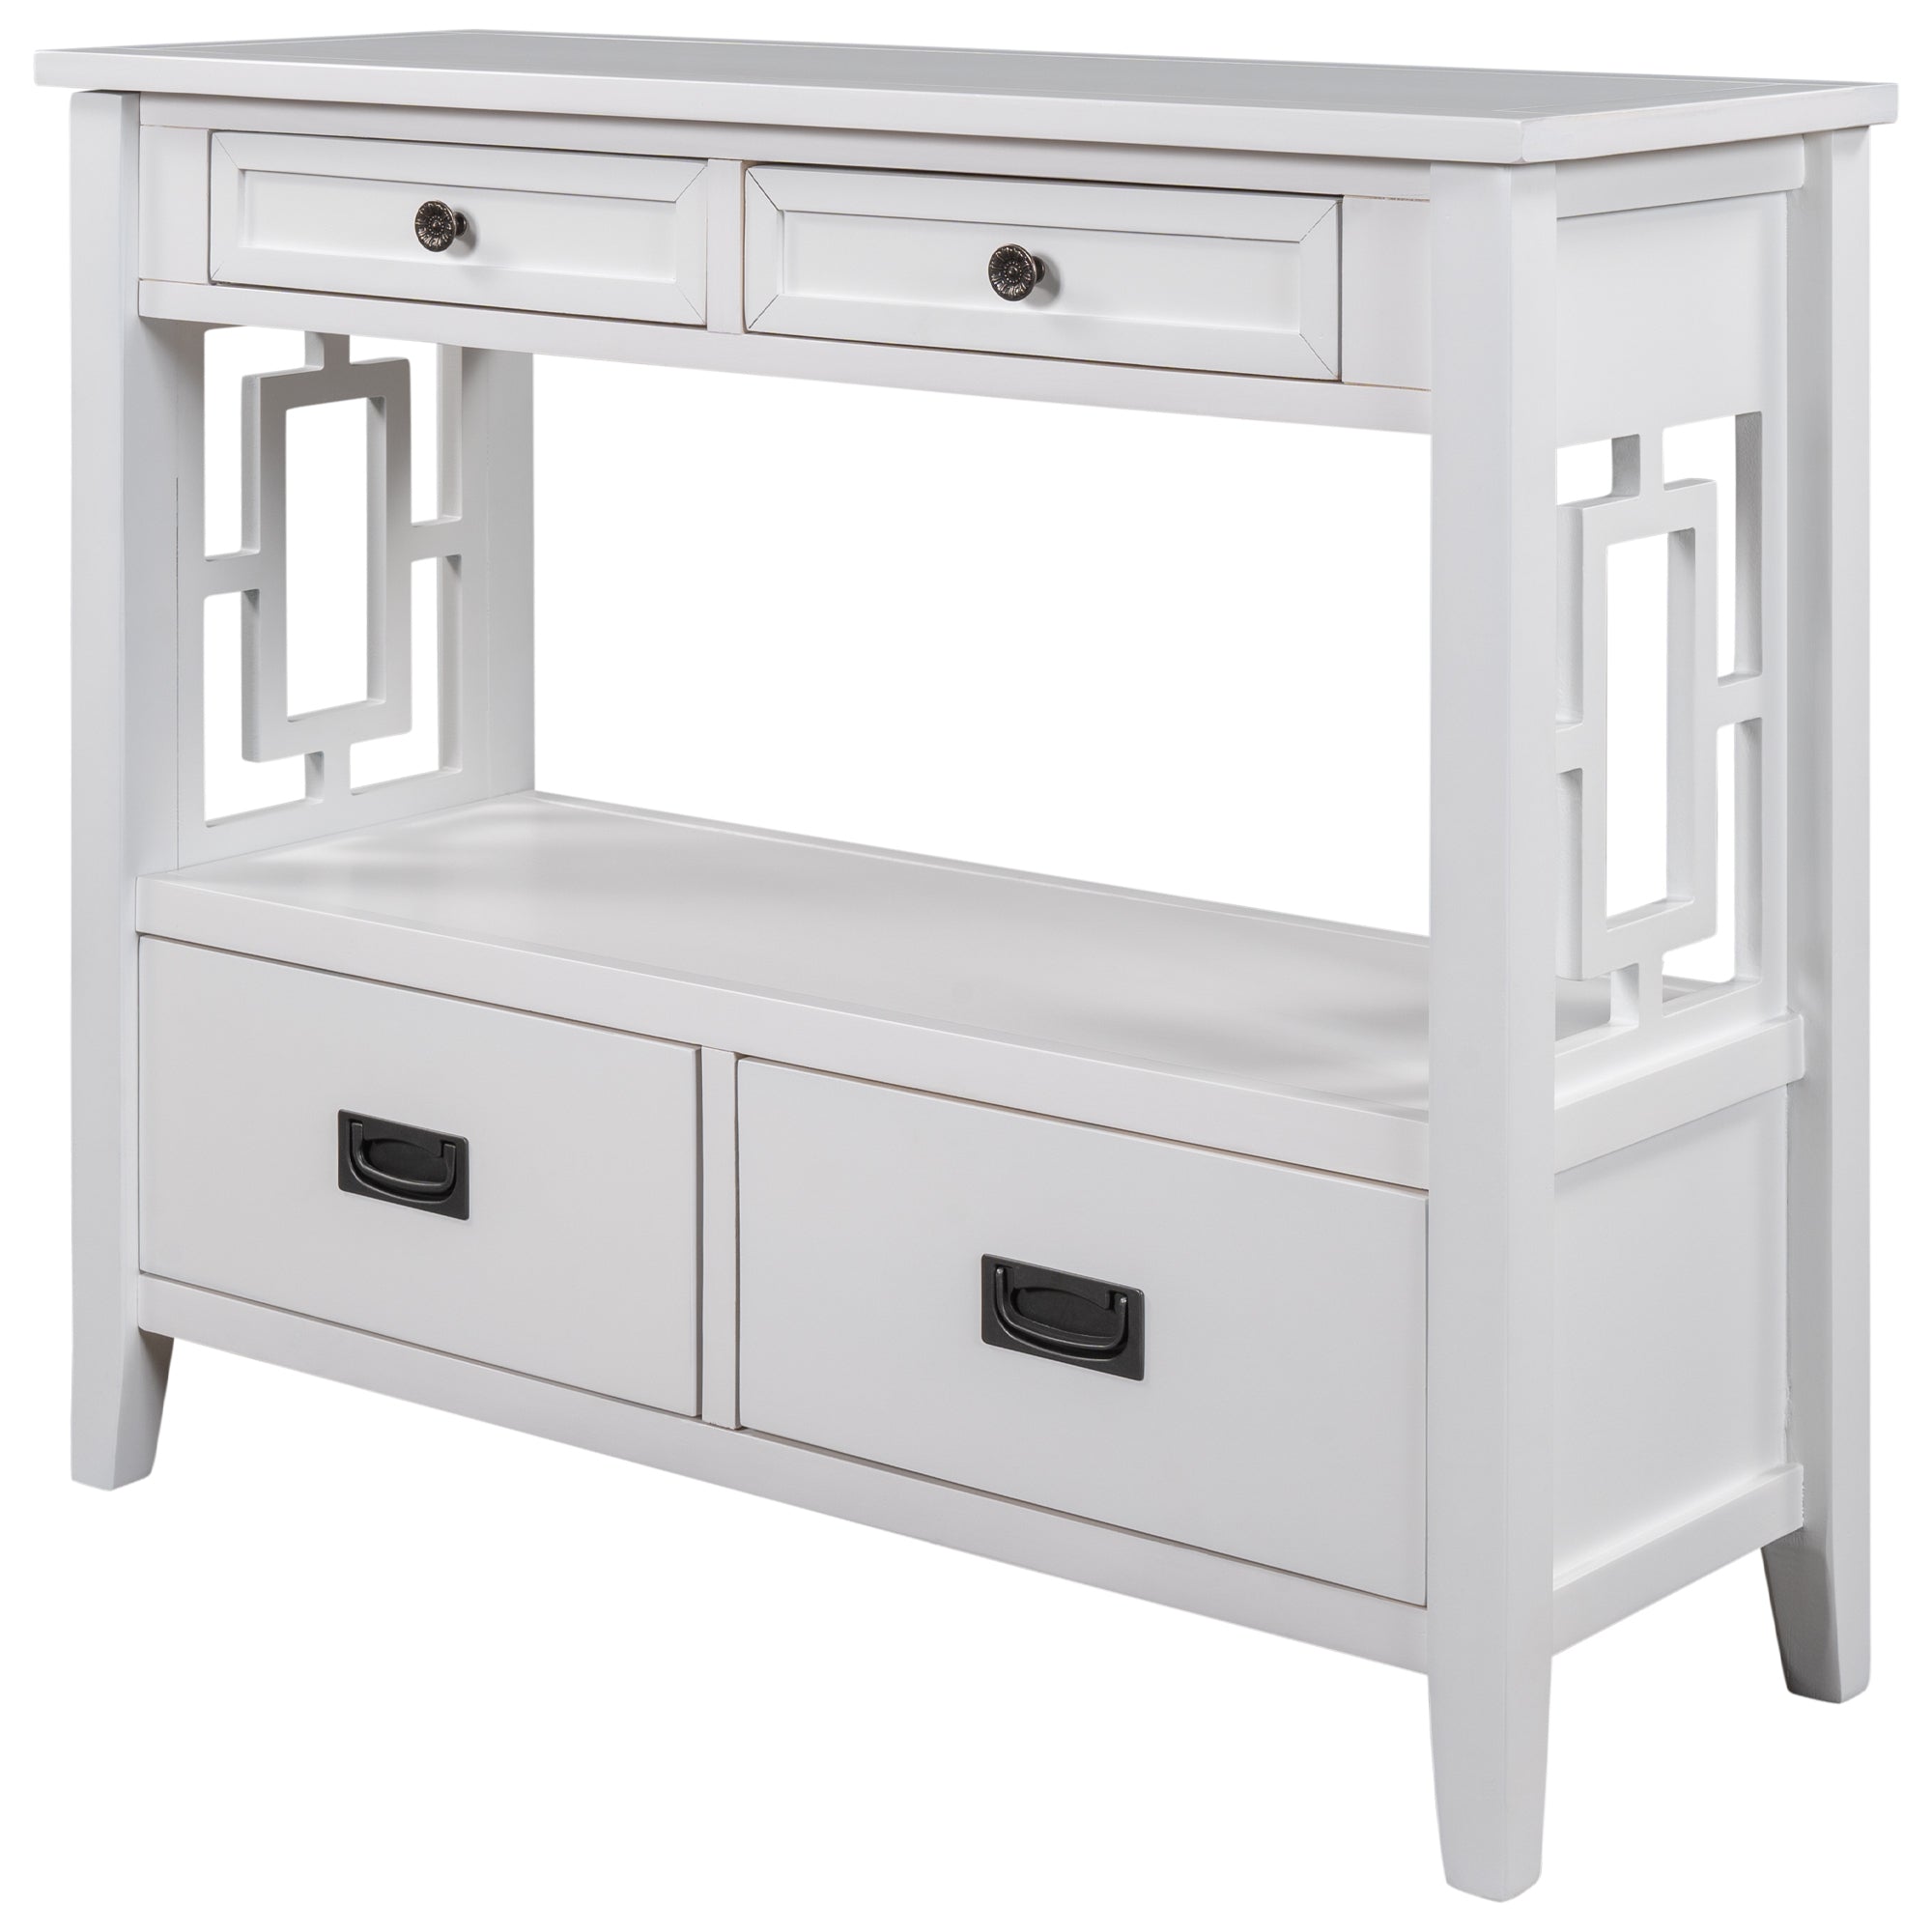 36'' Modern Console Table Sofa Table for Living Room with 4 Drawers and 1 Shelf (White)